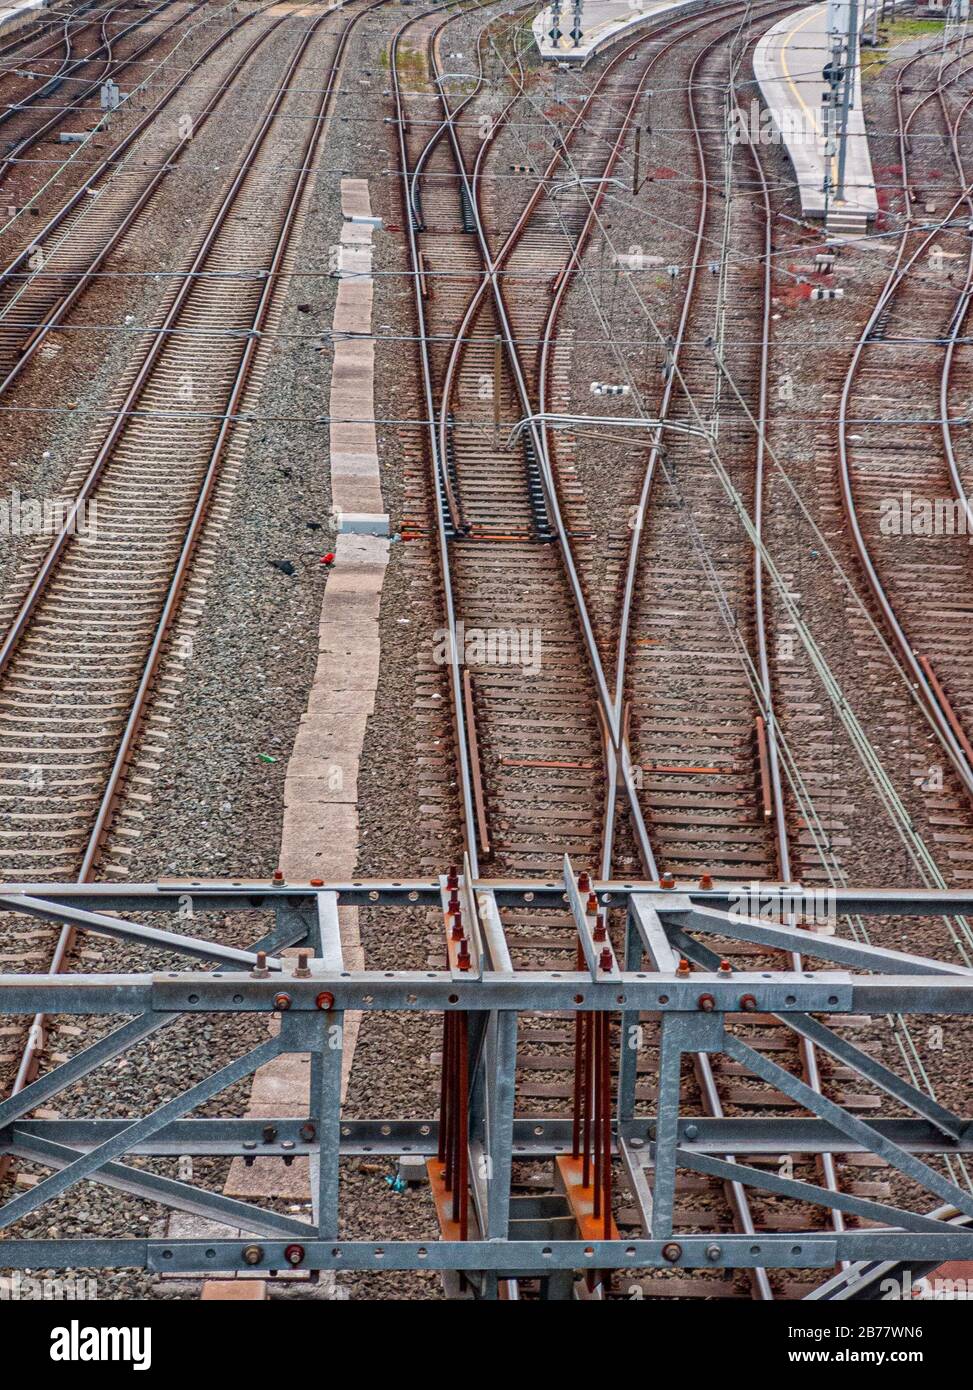 structures of railway tracks from above Stock Photo